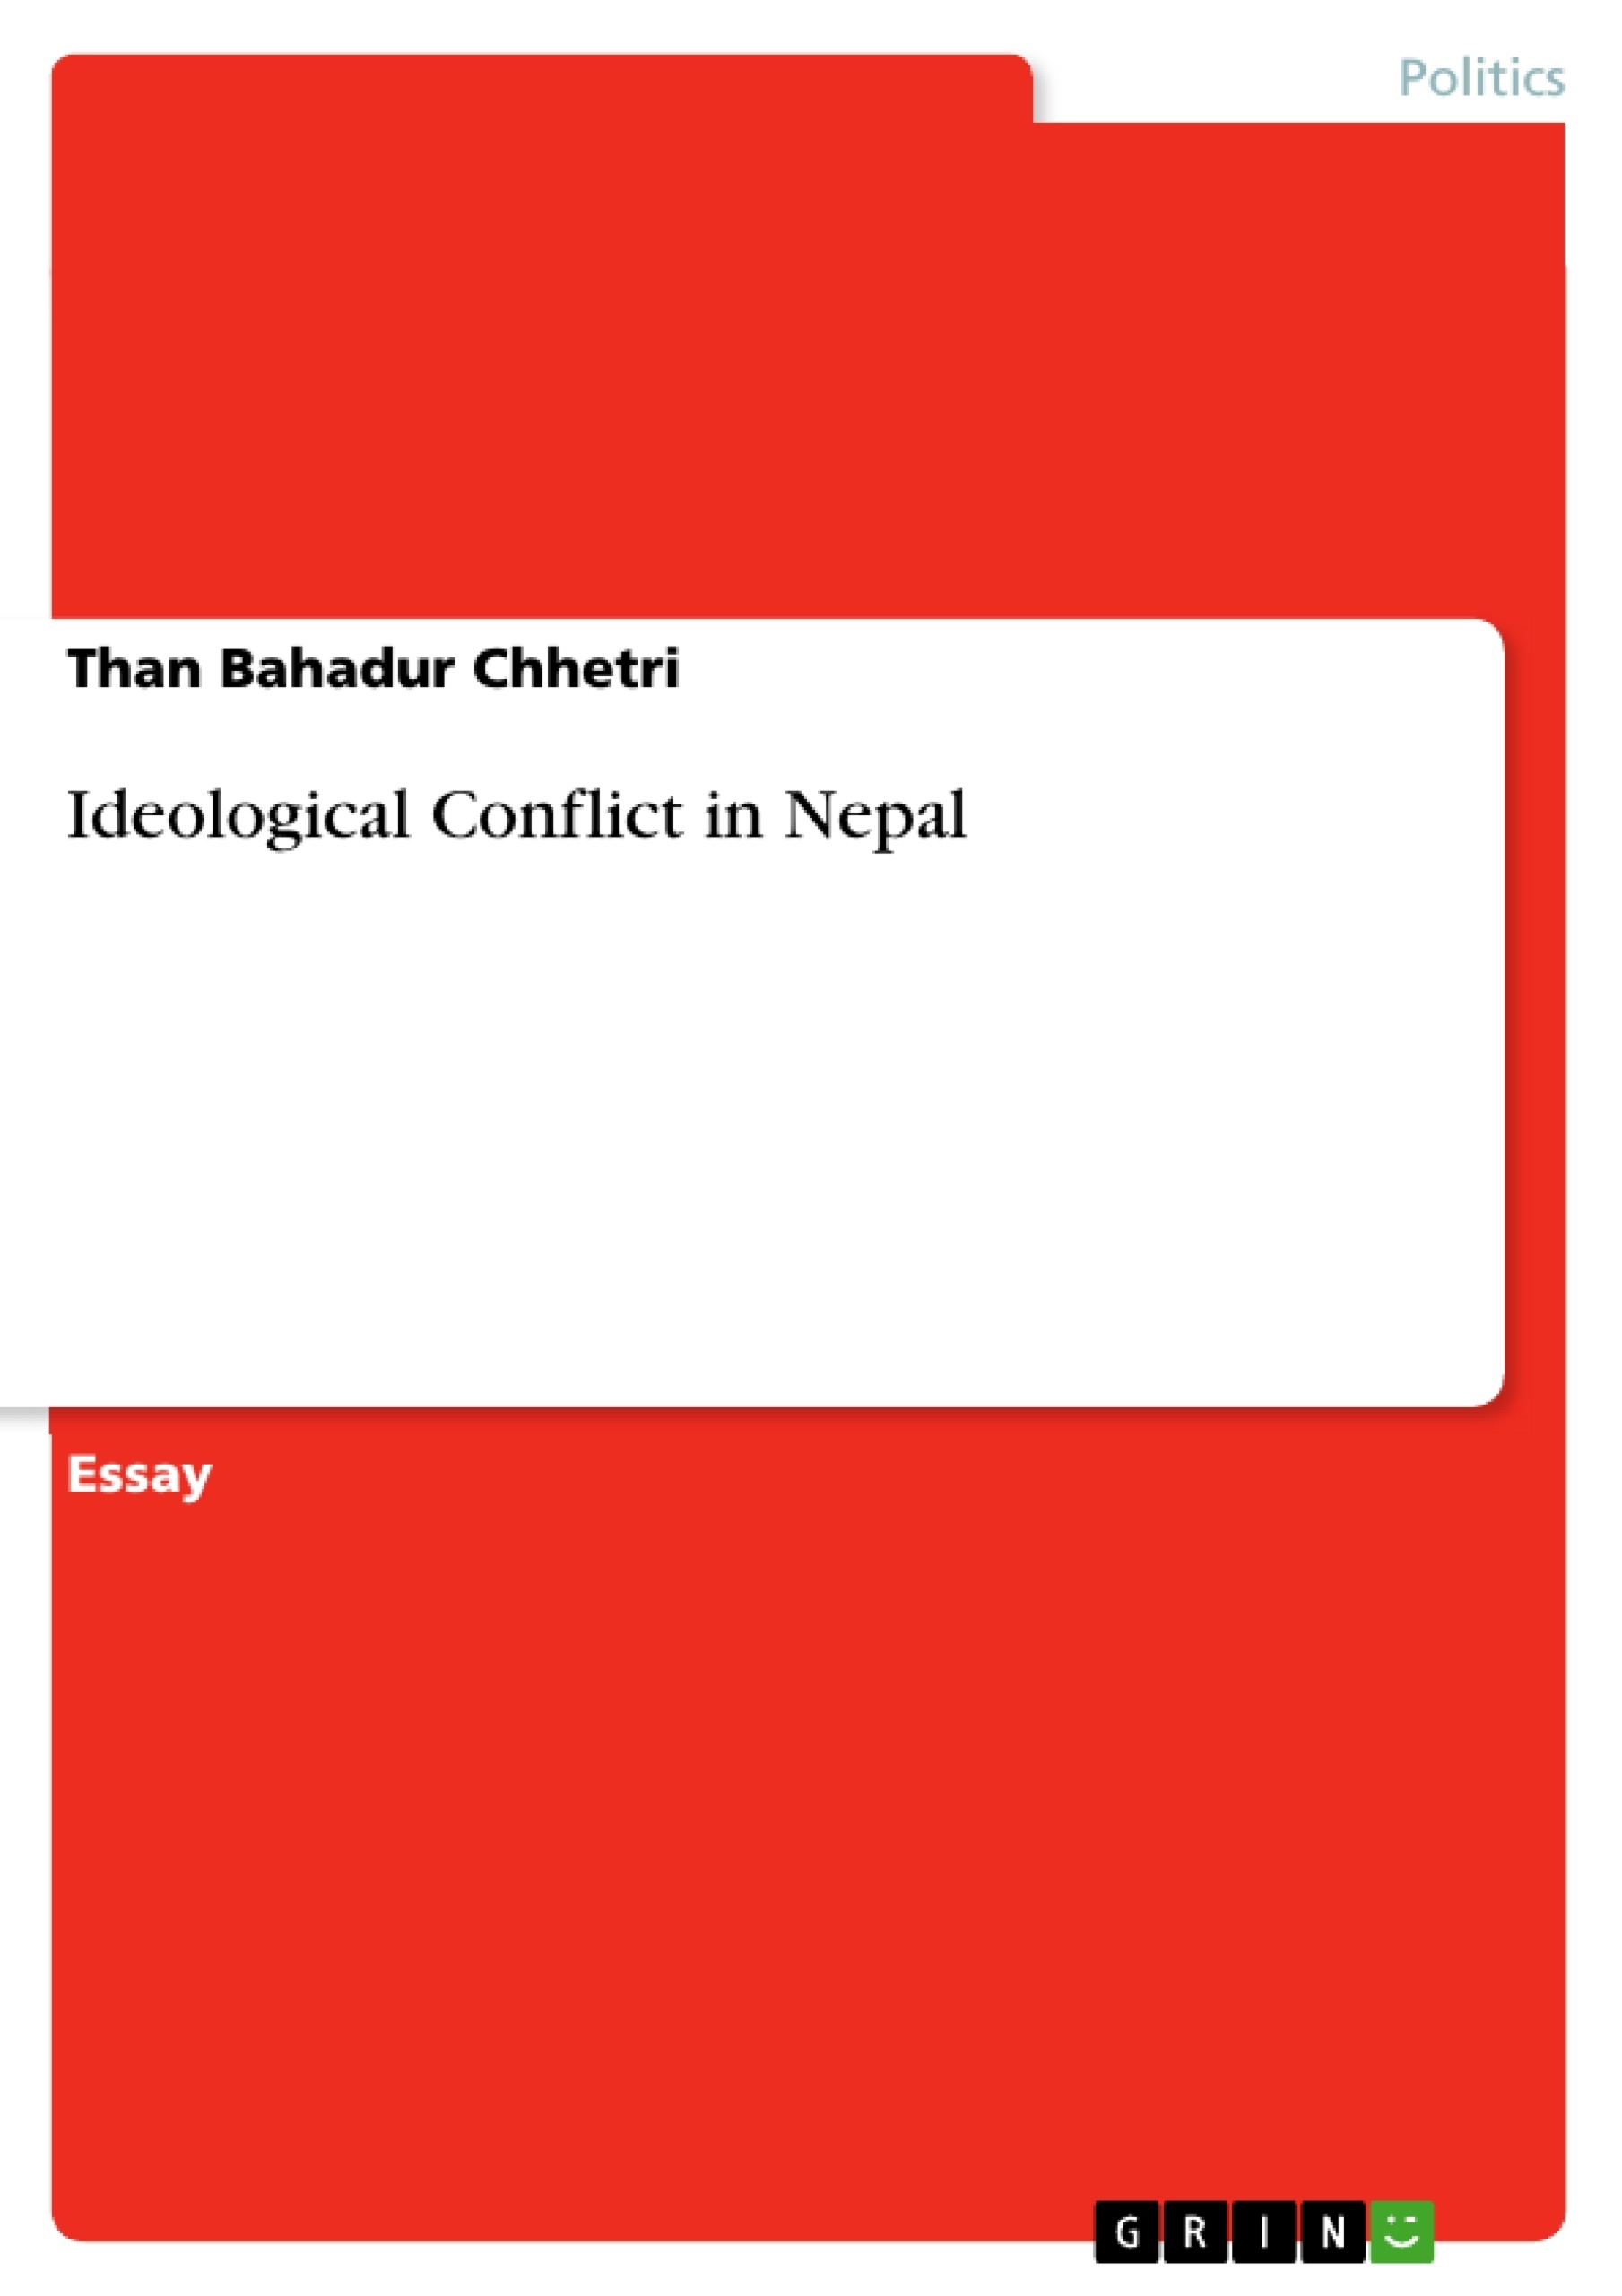 Title: Ideological Conflict in Nepal